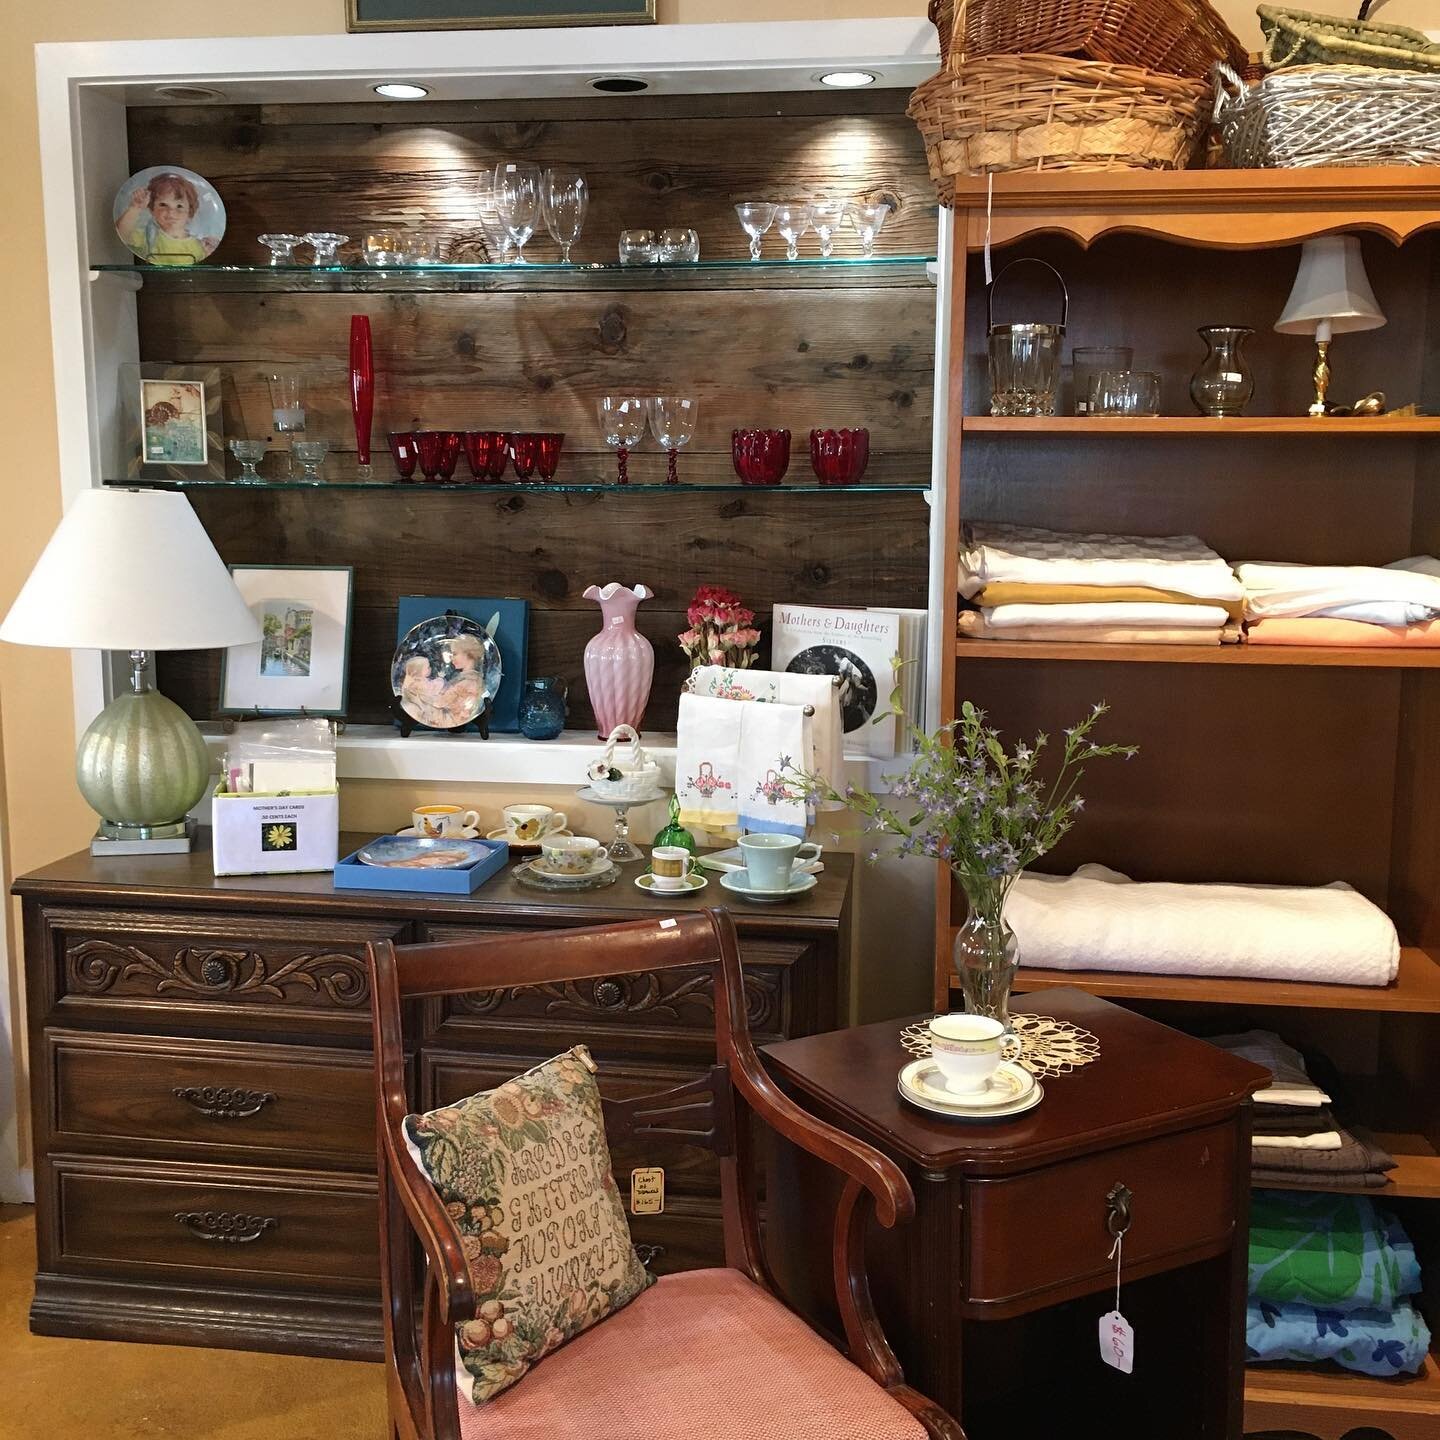 Out with the old and in with the new! We cleared a lot out this weekend to make space for lots of treasures. Come check out our new inventory, roll top desks, furniture, clothes, jewelry, lamps, and more! 

#thrifting #thriftstorefinds #thriftedfashi